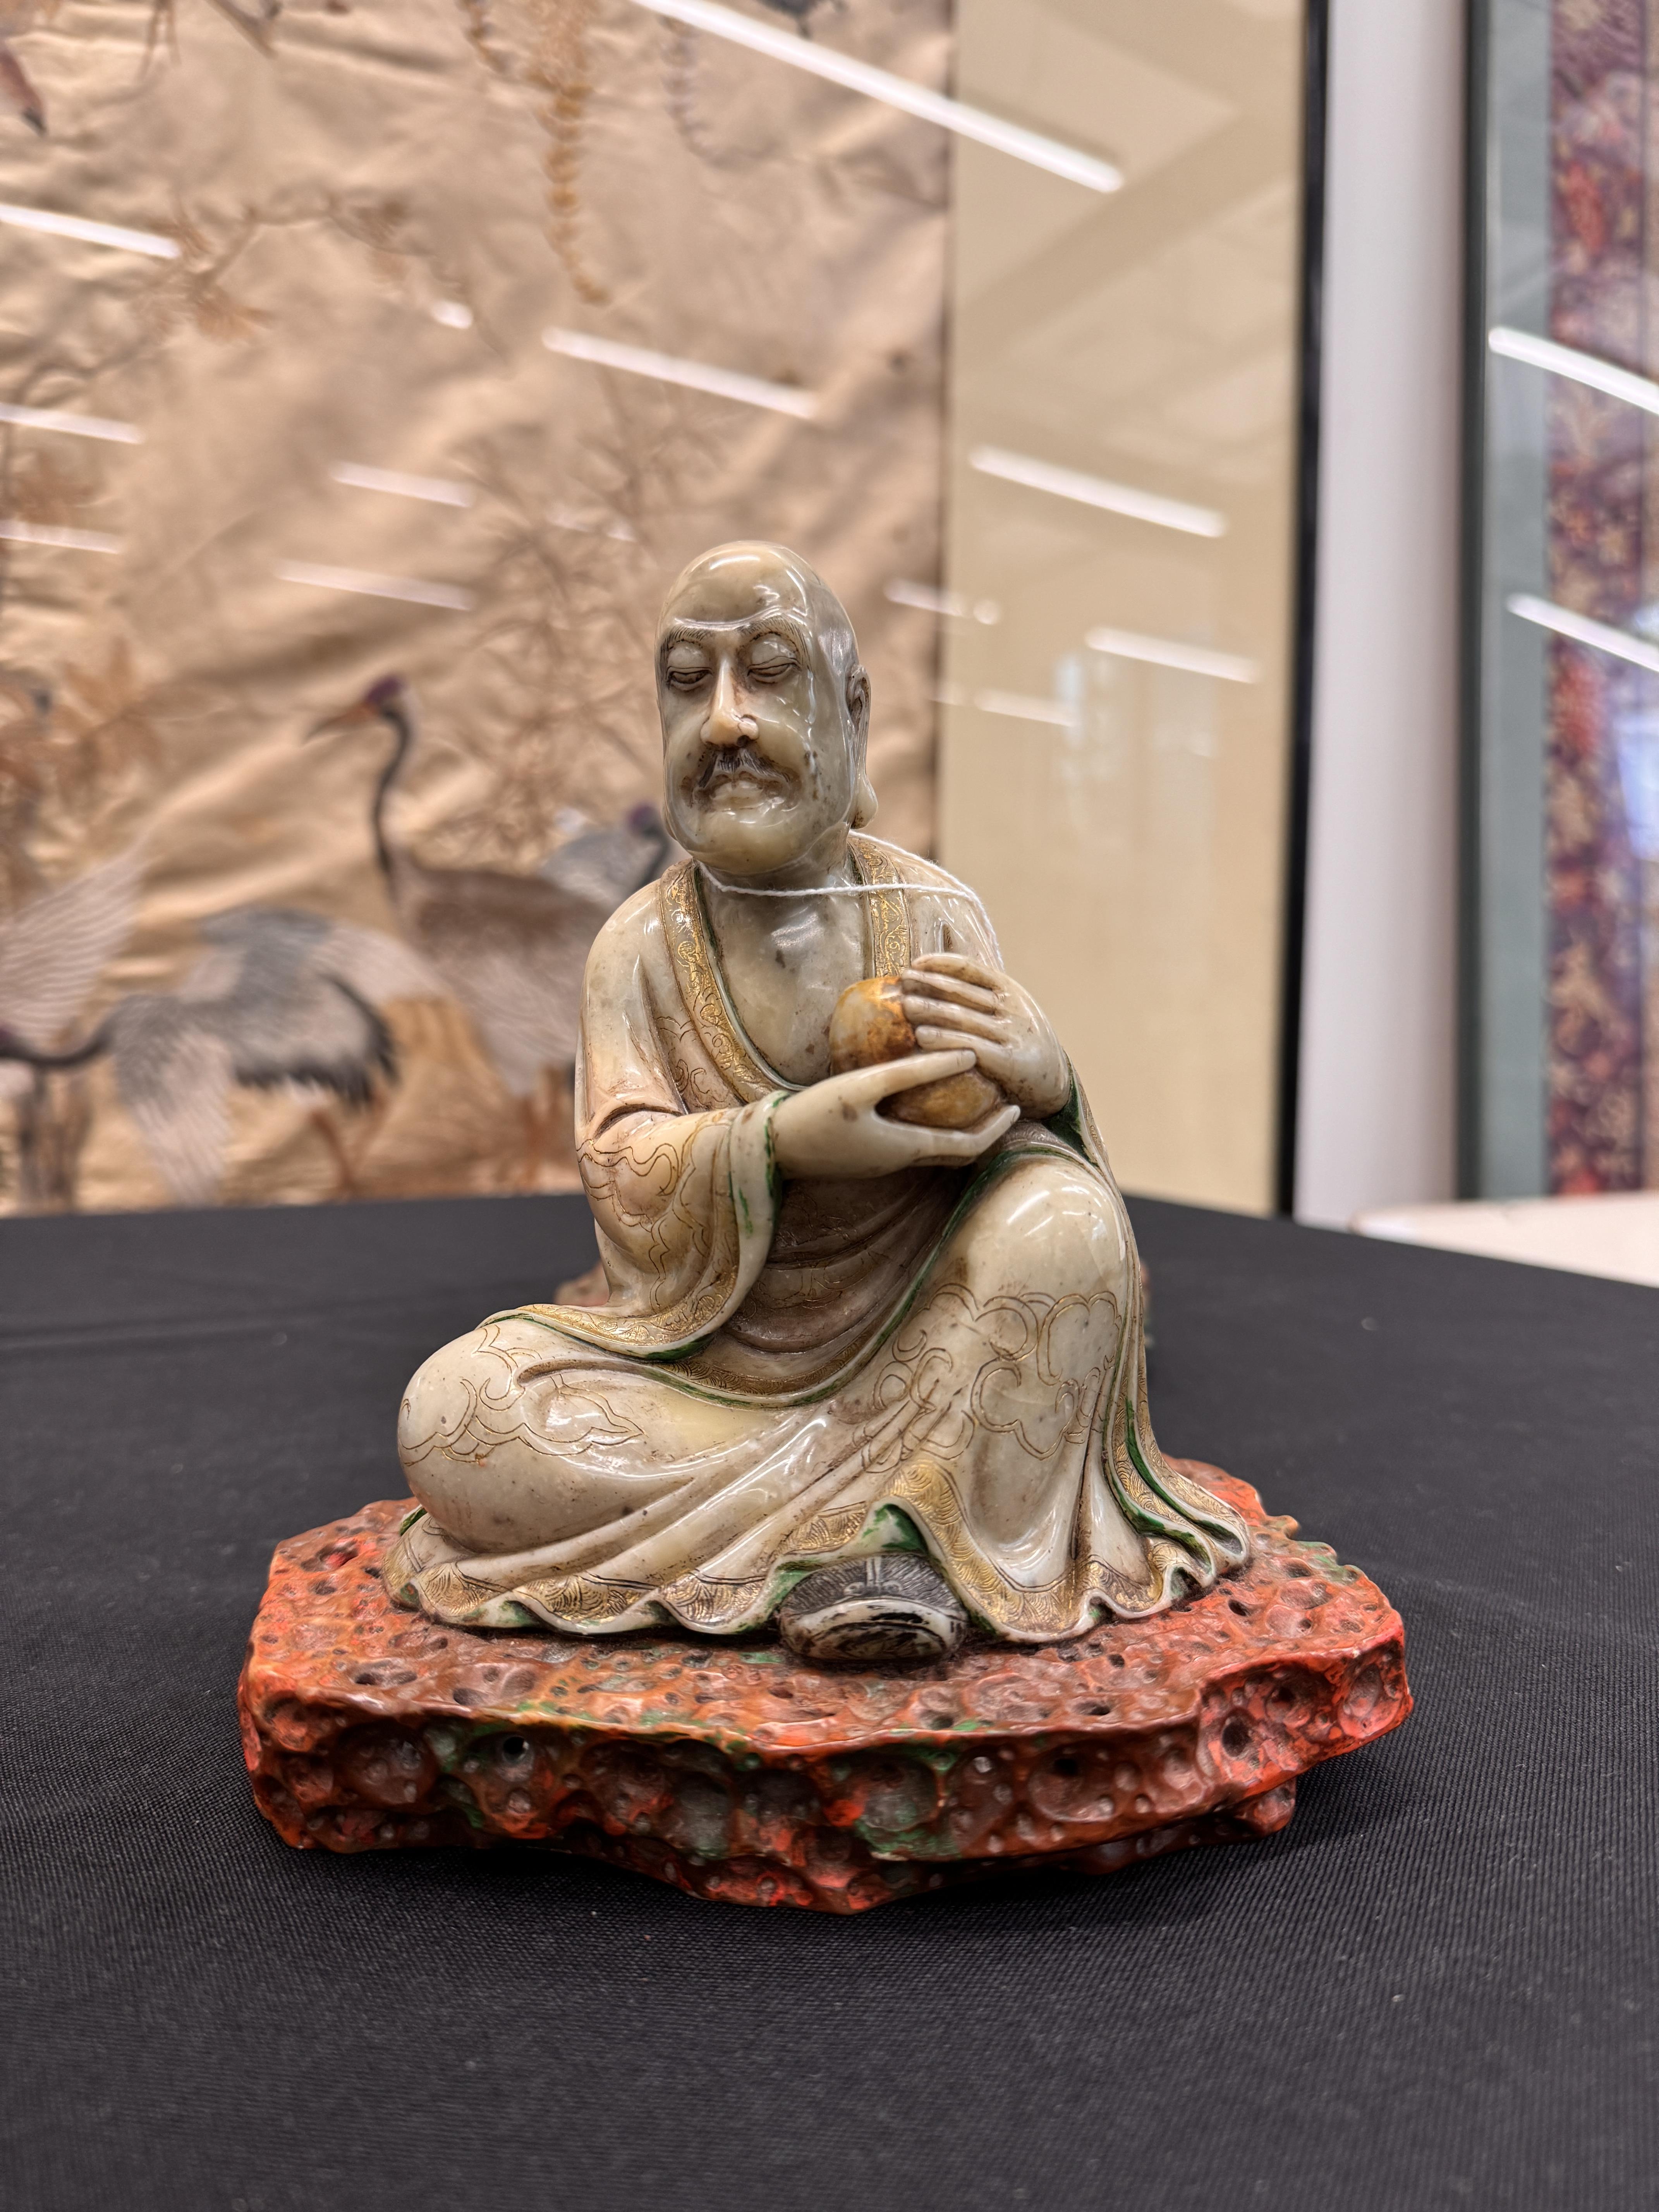 A PAIR OF FINE CHINESE SOAPSTONE 'LUOHAN' FIGURES 清康熙 壽山石羅漢坐像一對 - Image 10 of 24